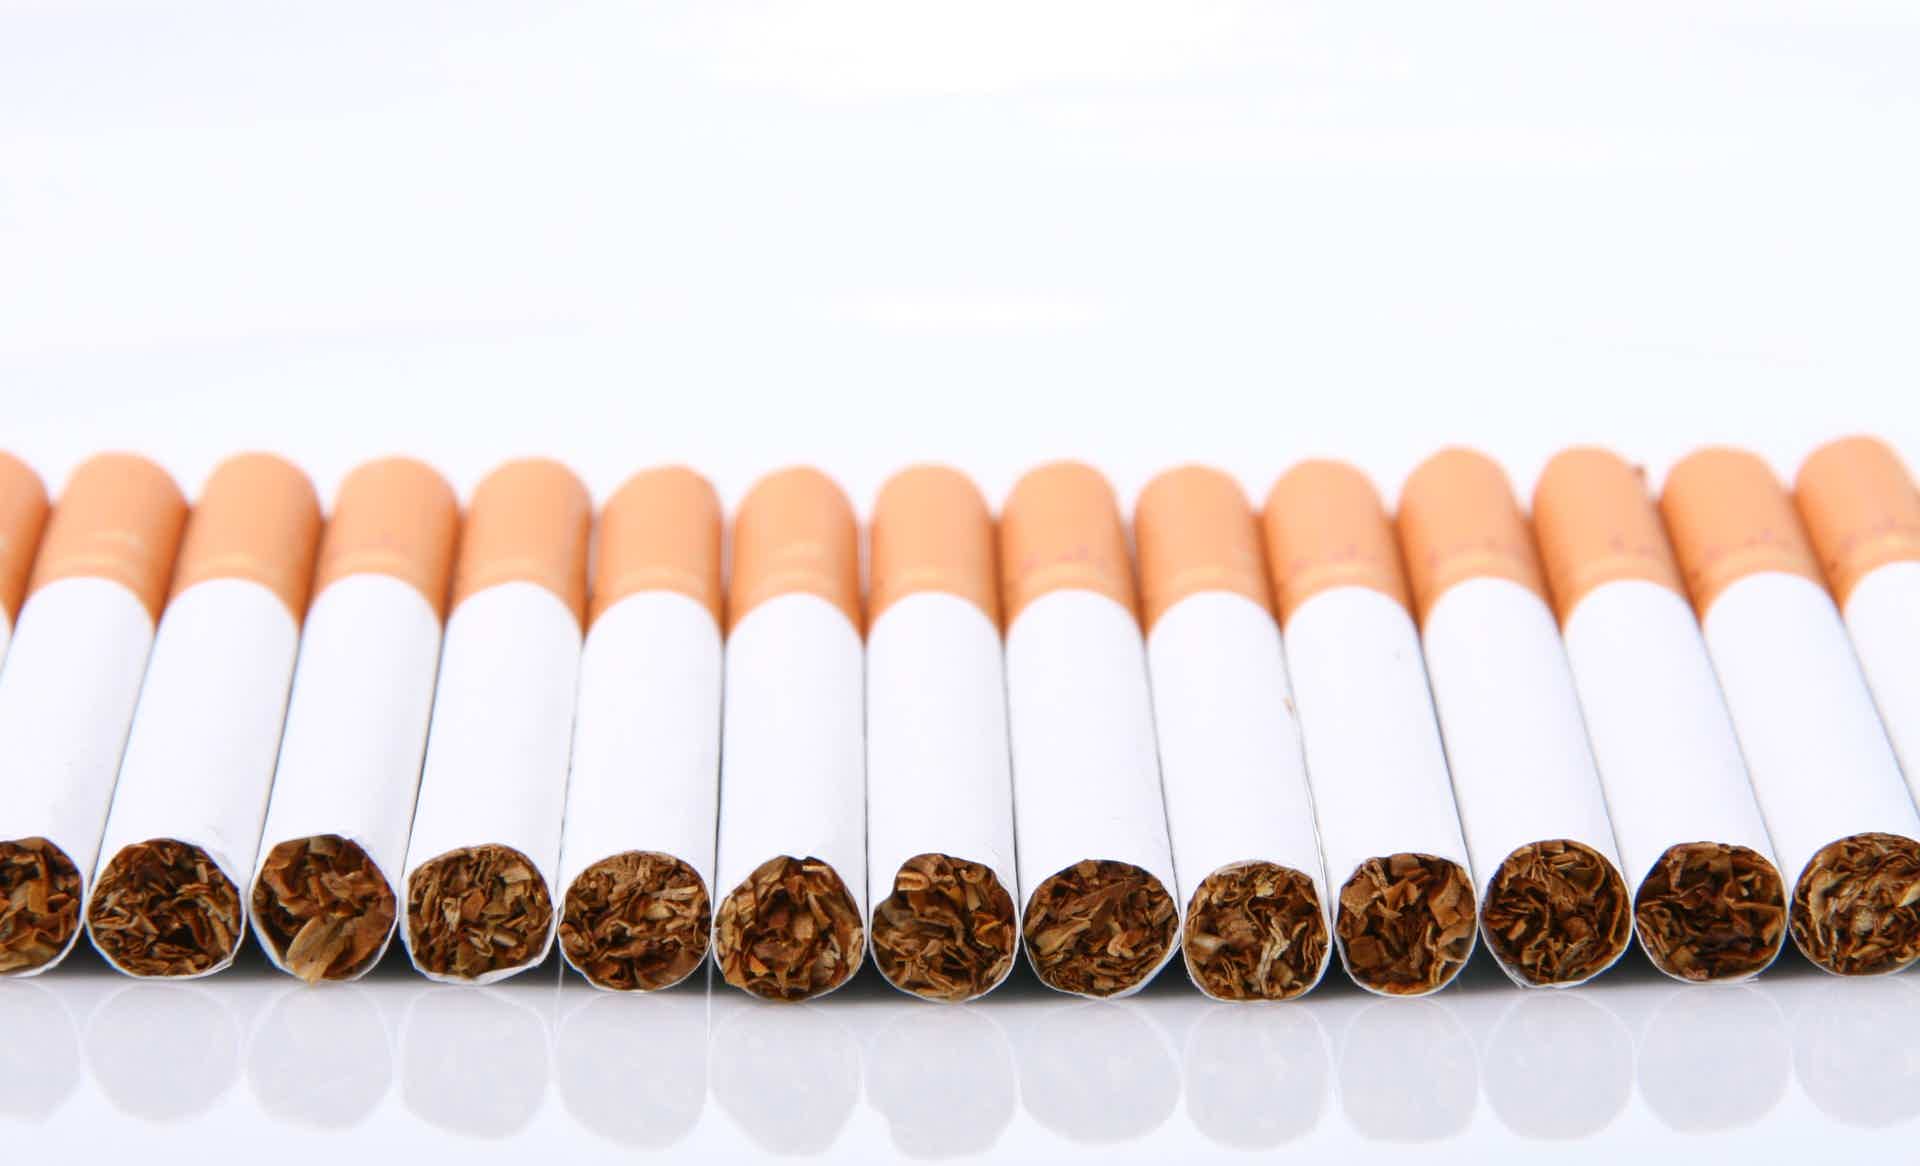 Understand how tobacco use could negatively impact your personal finances! Source: Unsplash.